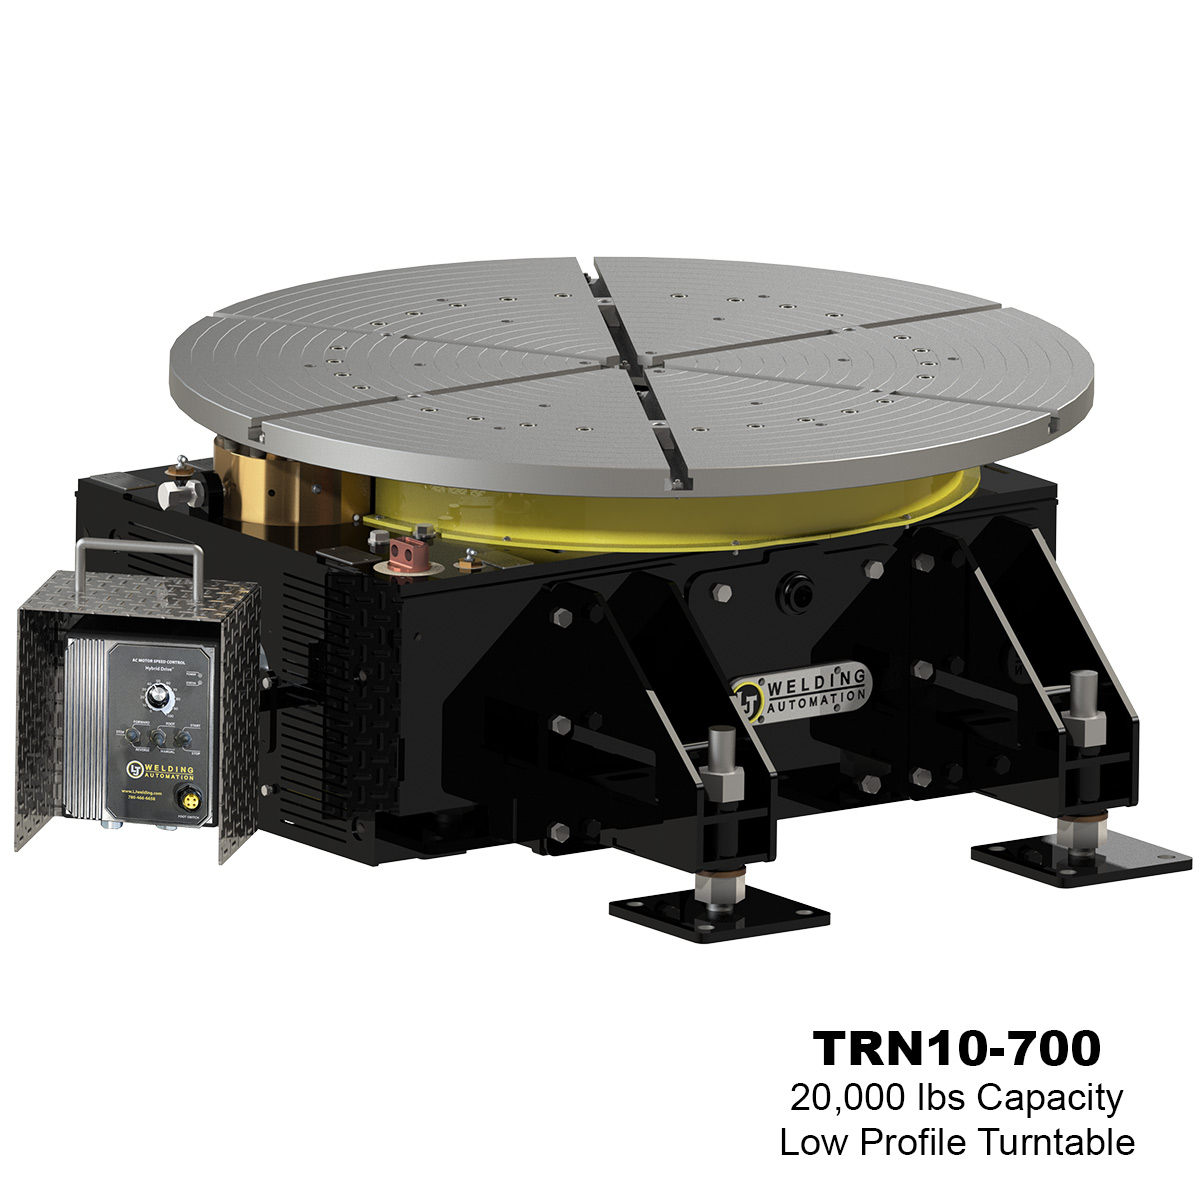 01-20000lb-Low-Profile-Turntable